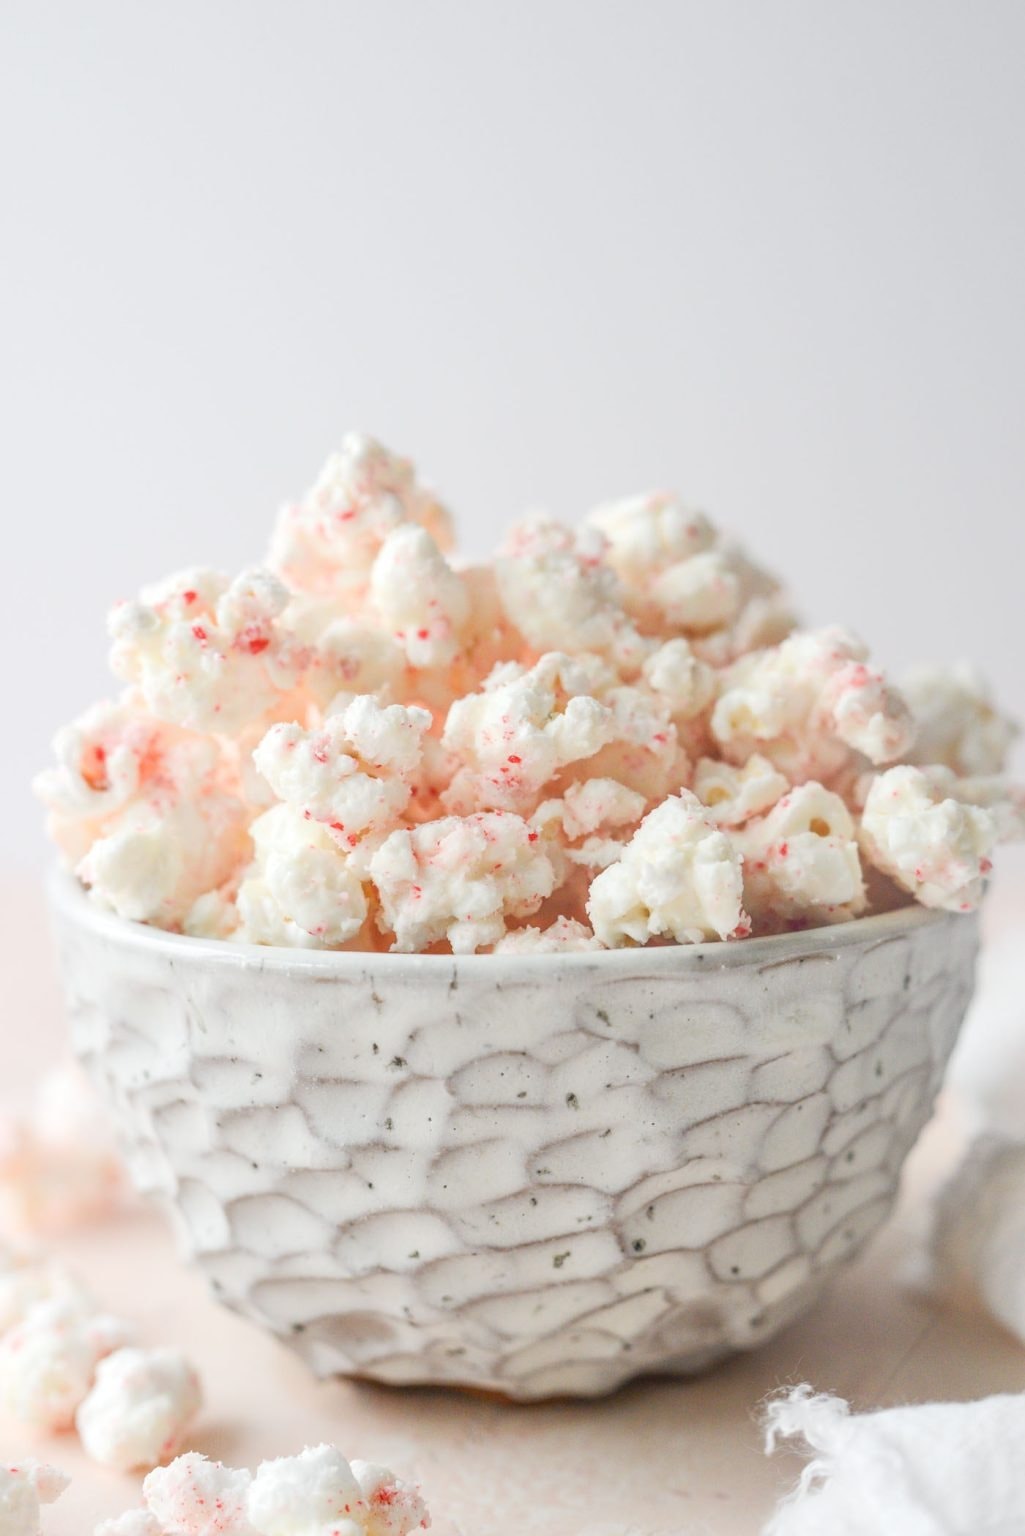 A bowl of white chocolate popcorn dusted with peppermint.